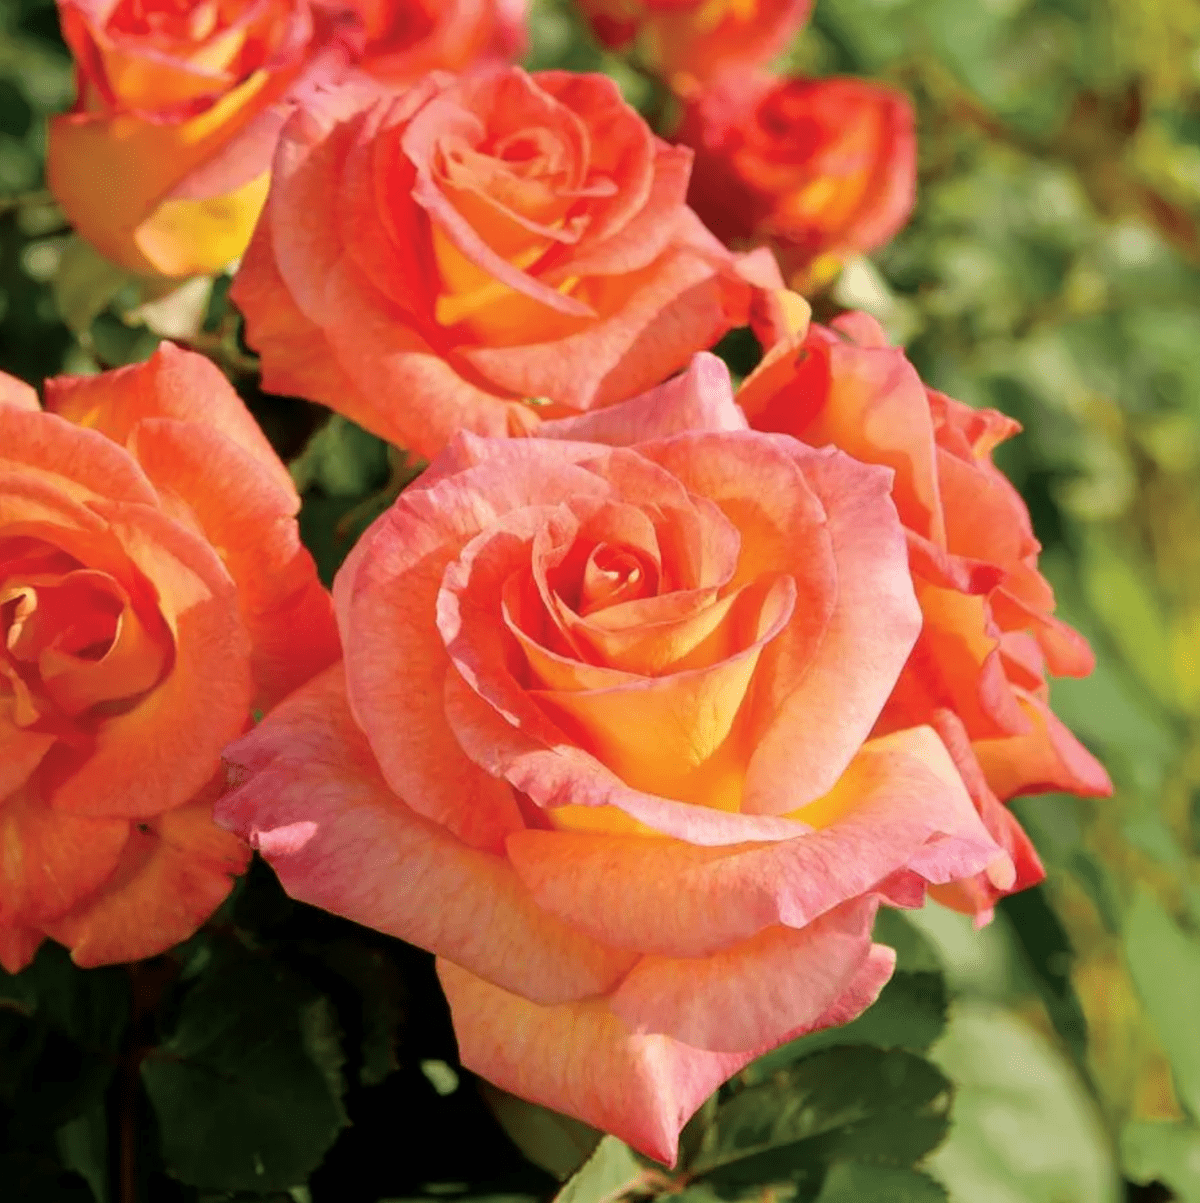 Do Roses Need Full Sun or Shade to Grow Best?